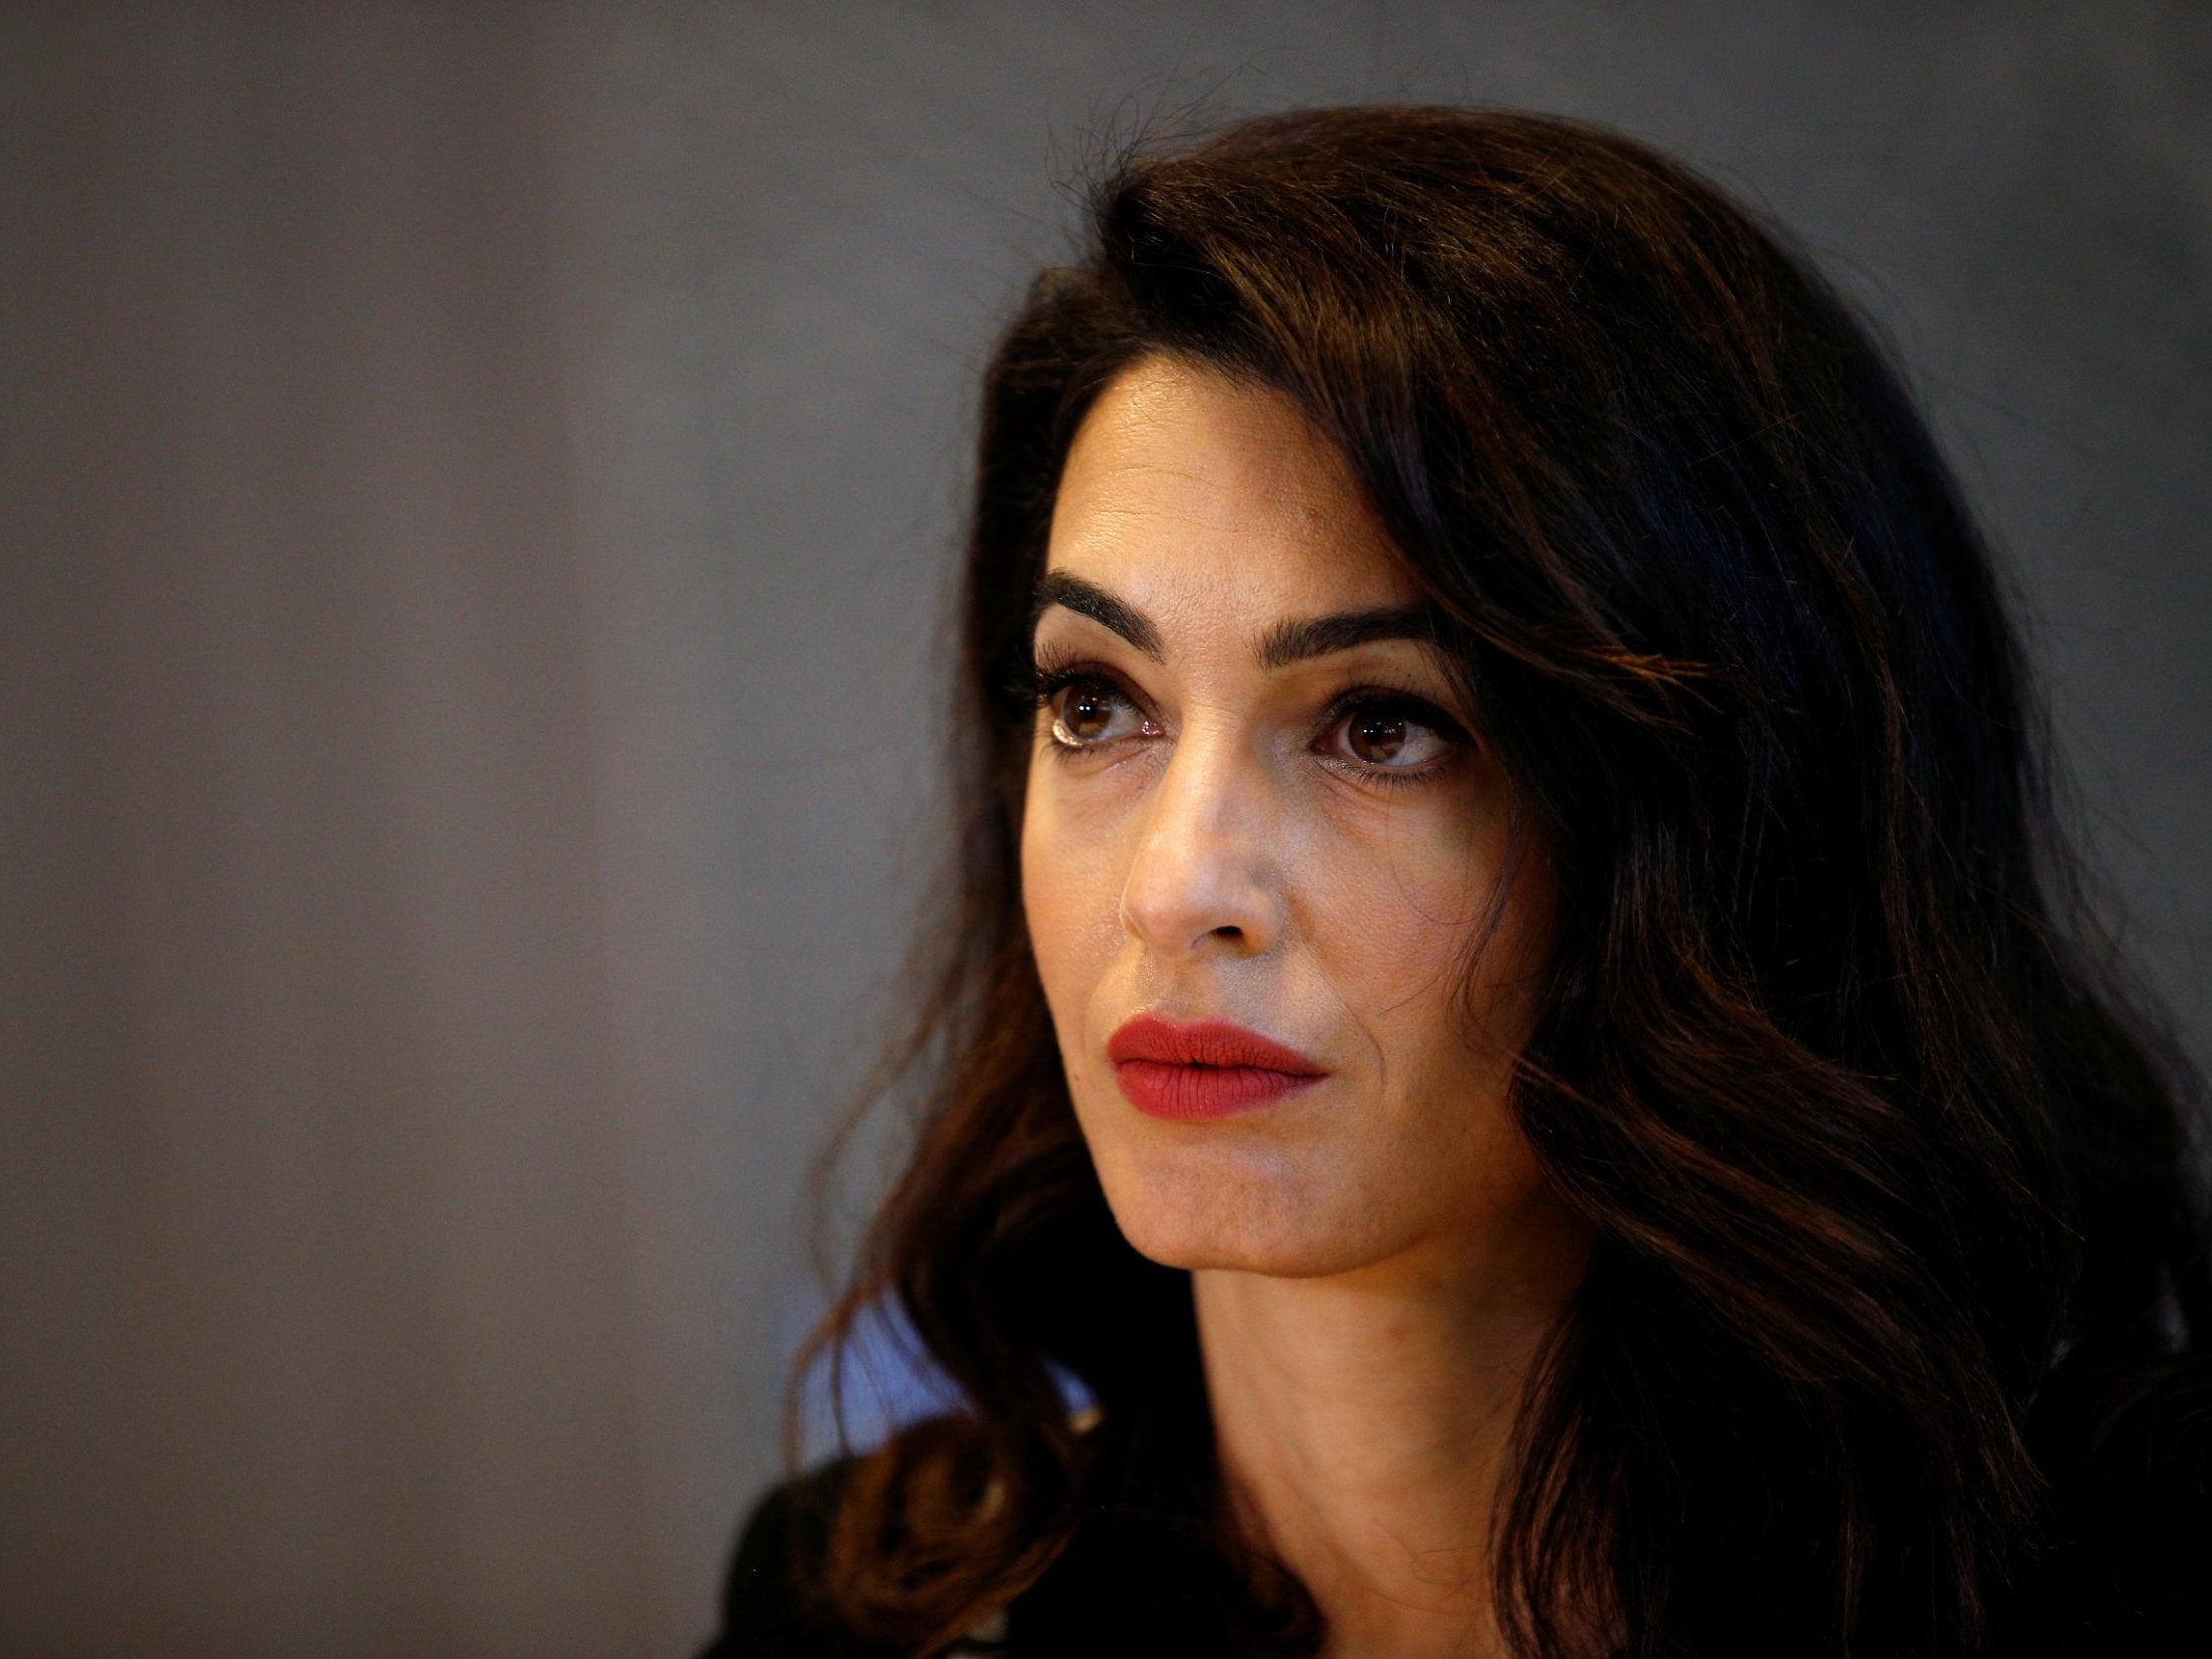 Human rights lawyer Amal Clooney has been appointed the UK Foreign Office's special envoy on media freedom